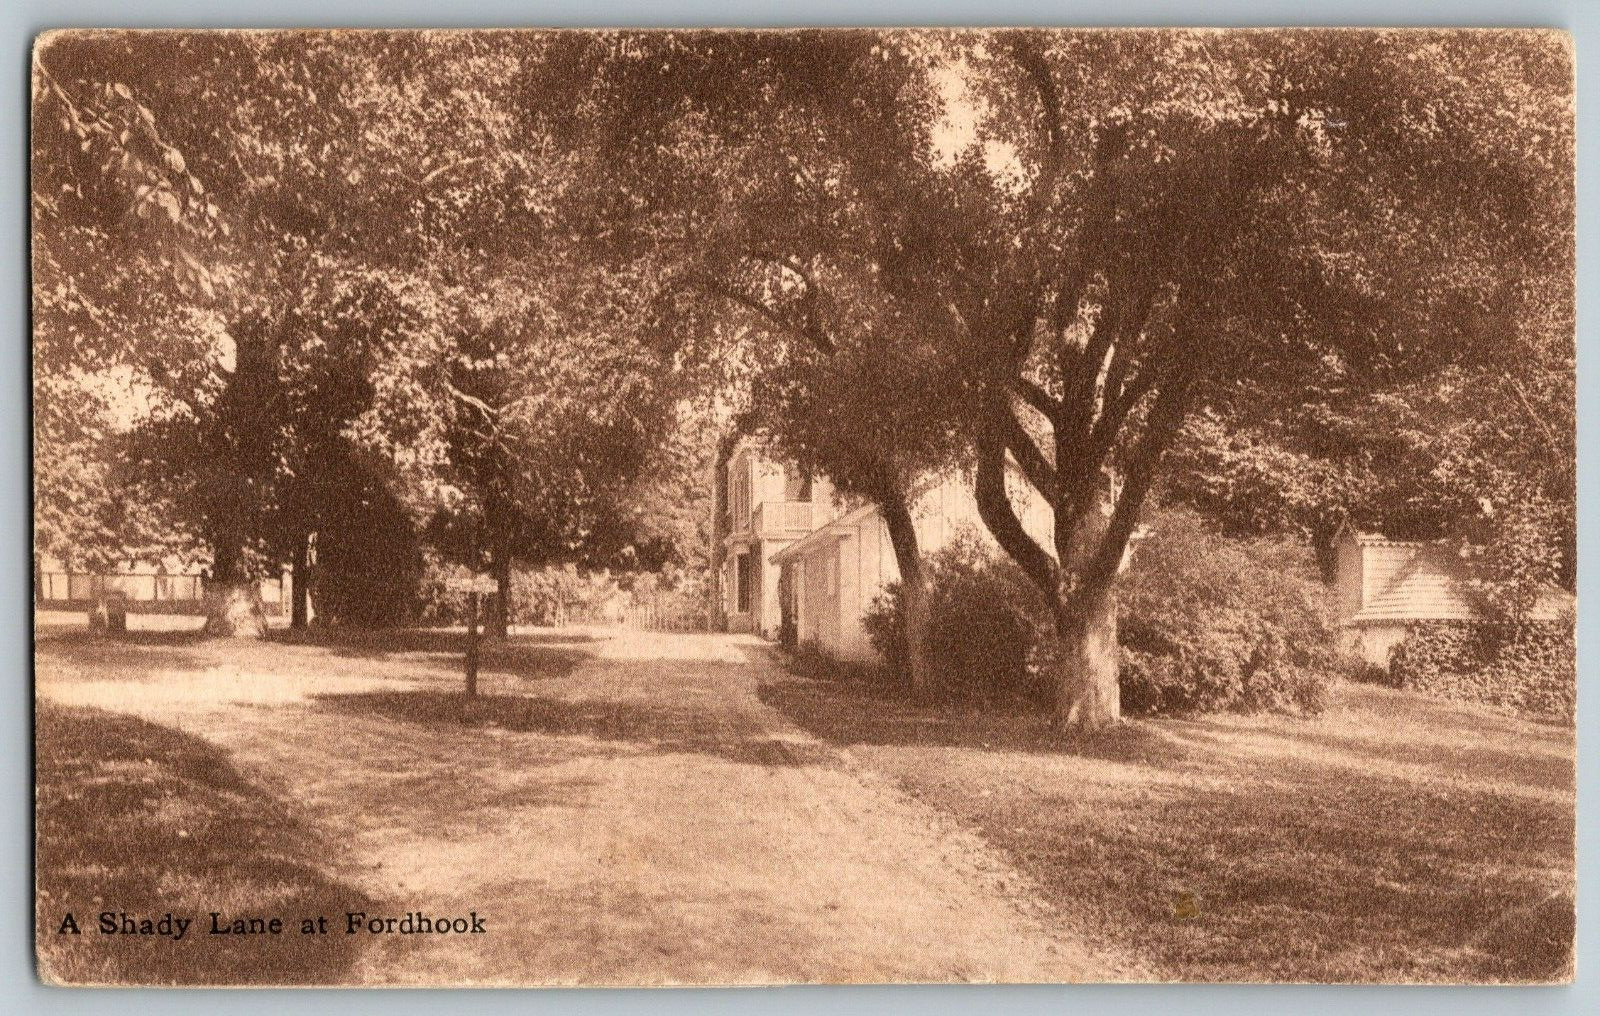 A Shady Lane at Fordhook - Vintage Postcard - Posted 1907